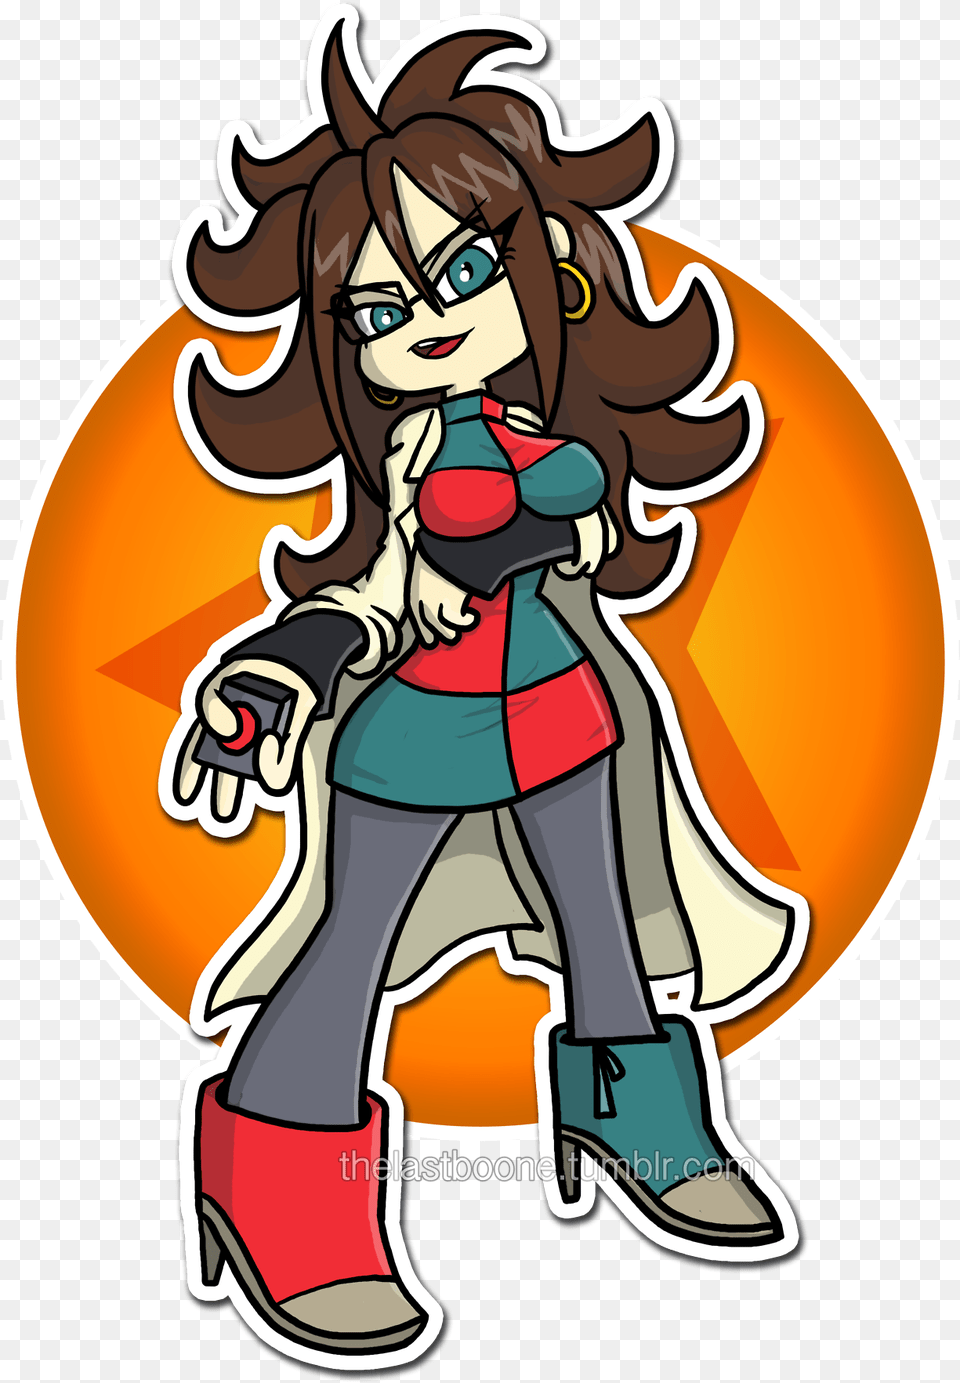 Android 21 Because Why Not Cartoon, Book, Comics, Publication, Baby Png